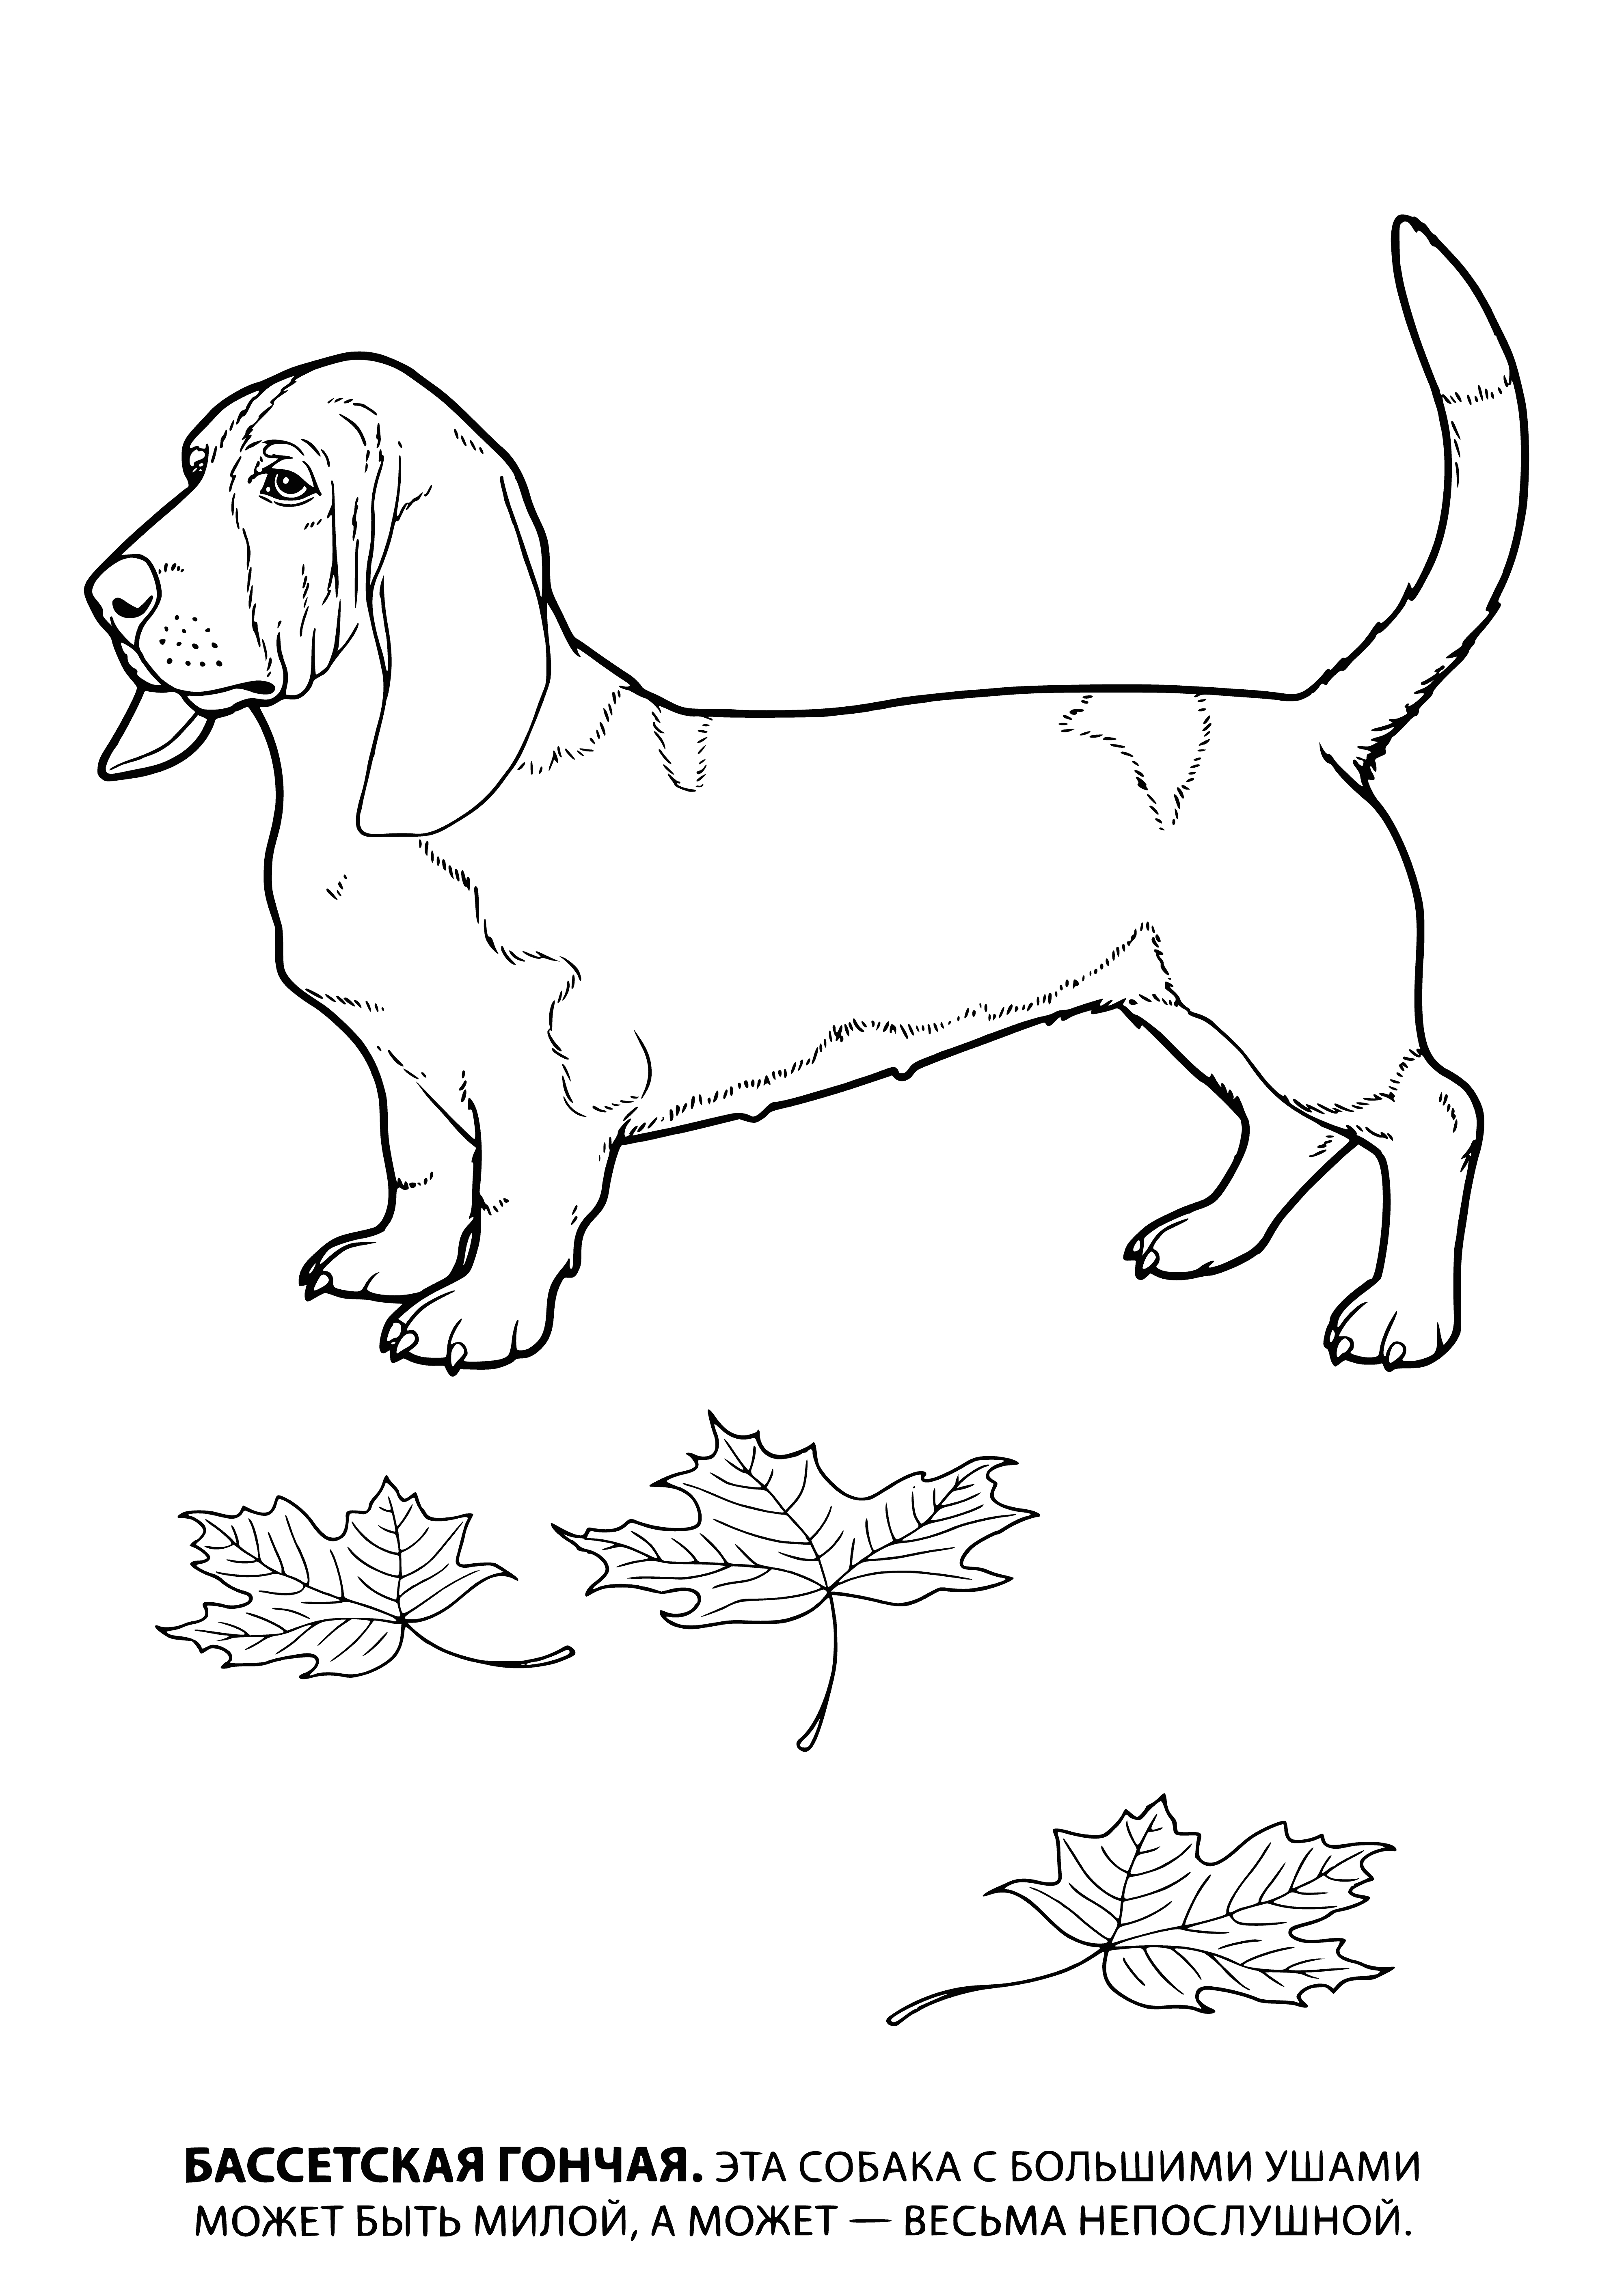 Basset hound coloring page